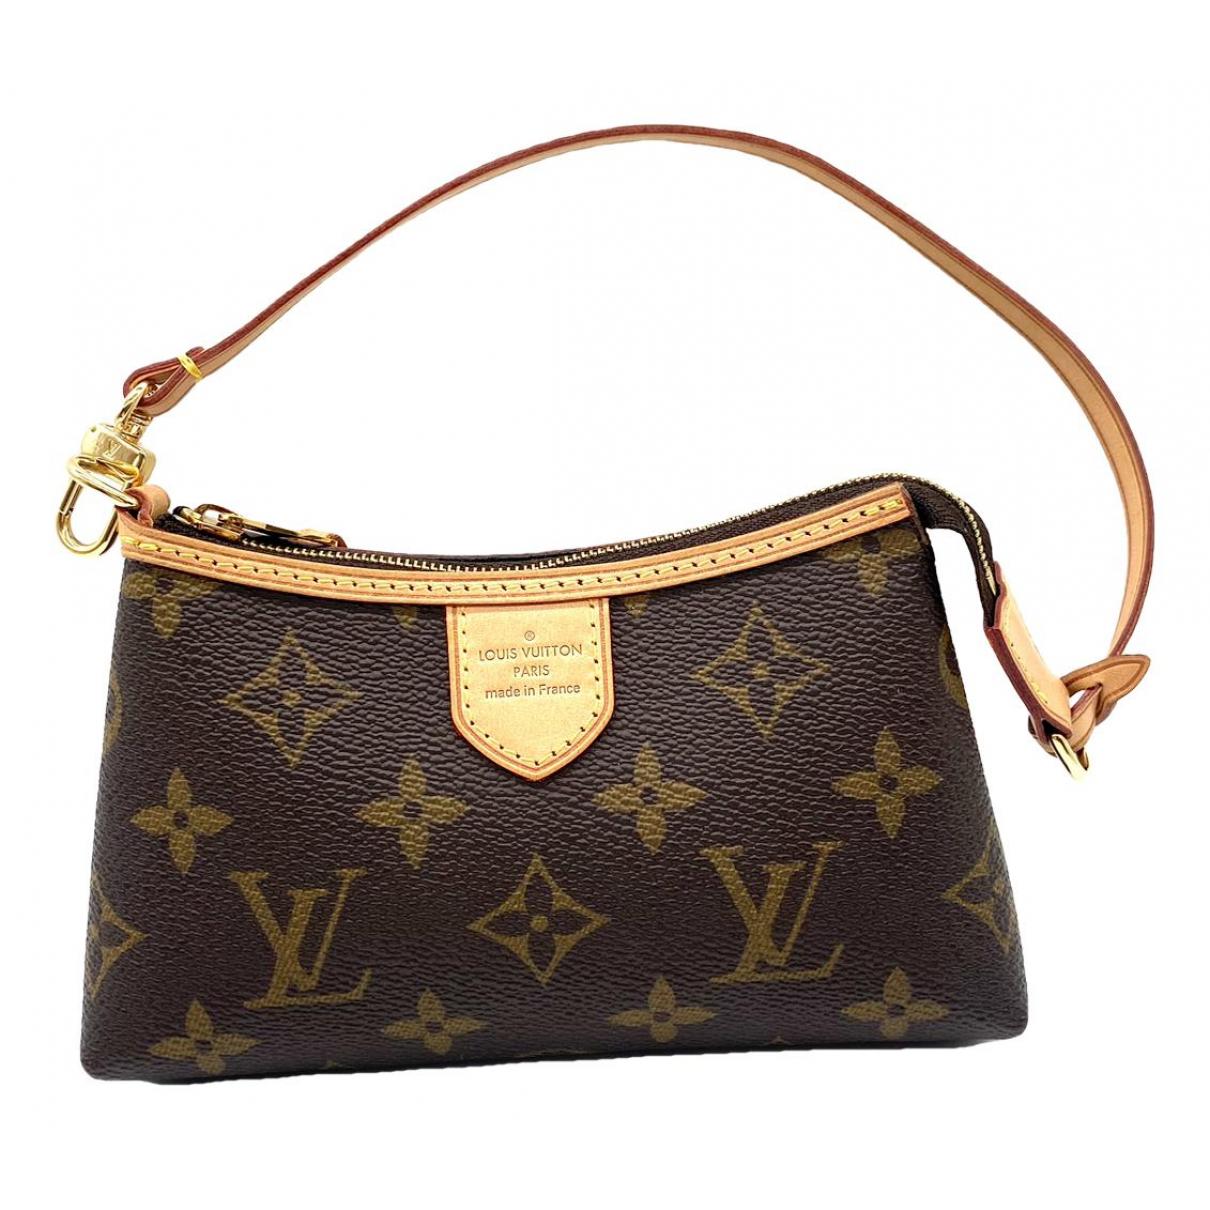 Louis Vuitton - Authenticated Delightful Handbag - Leather Brown for Women, Never Worn